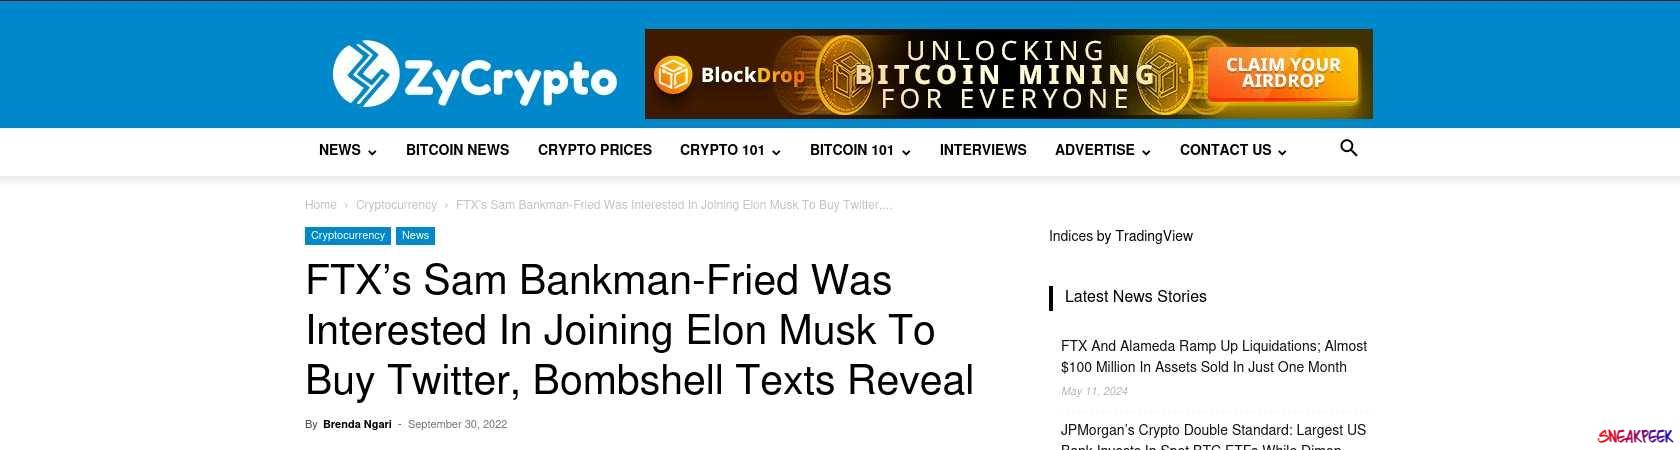 Read the full Article:  ⭲ FTX’s Sam Bankman-Fried Was Interested In Joining Elon Musk To Buy Twitter, Bombshell Texts Reveal